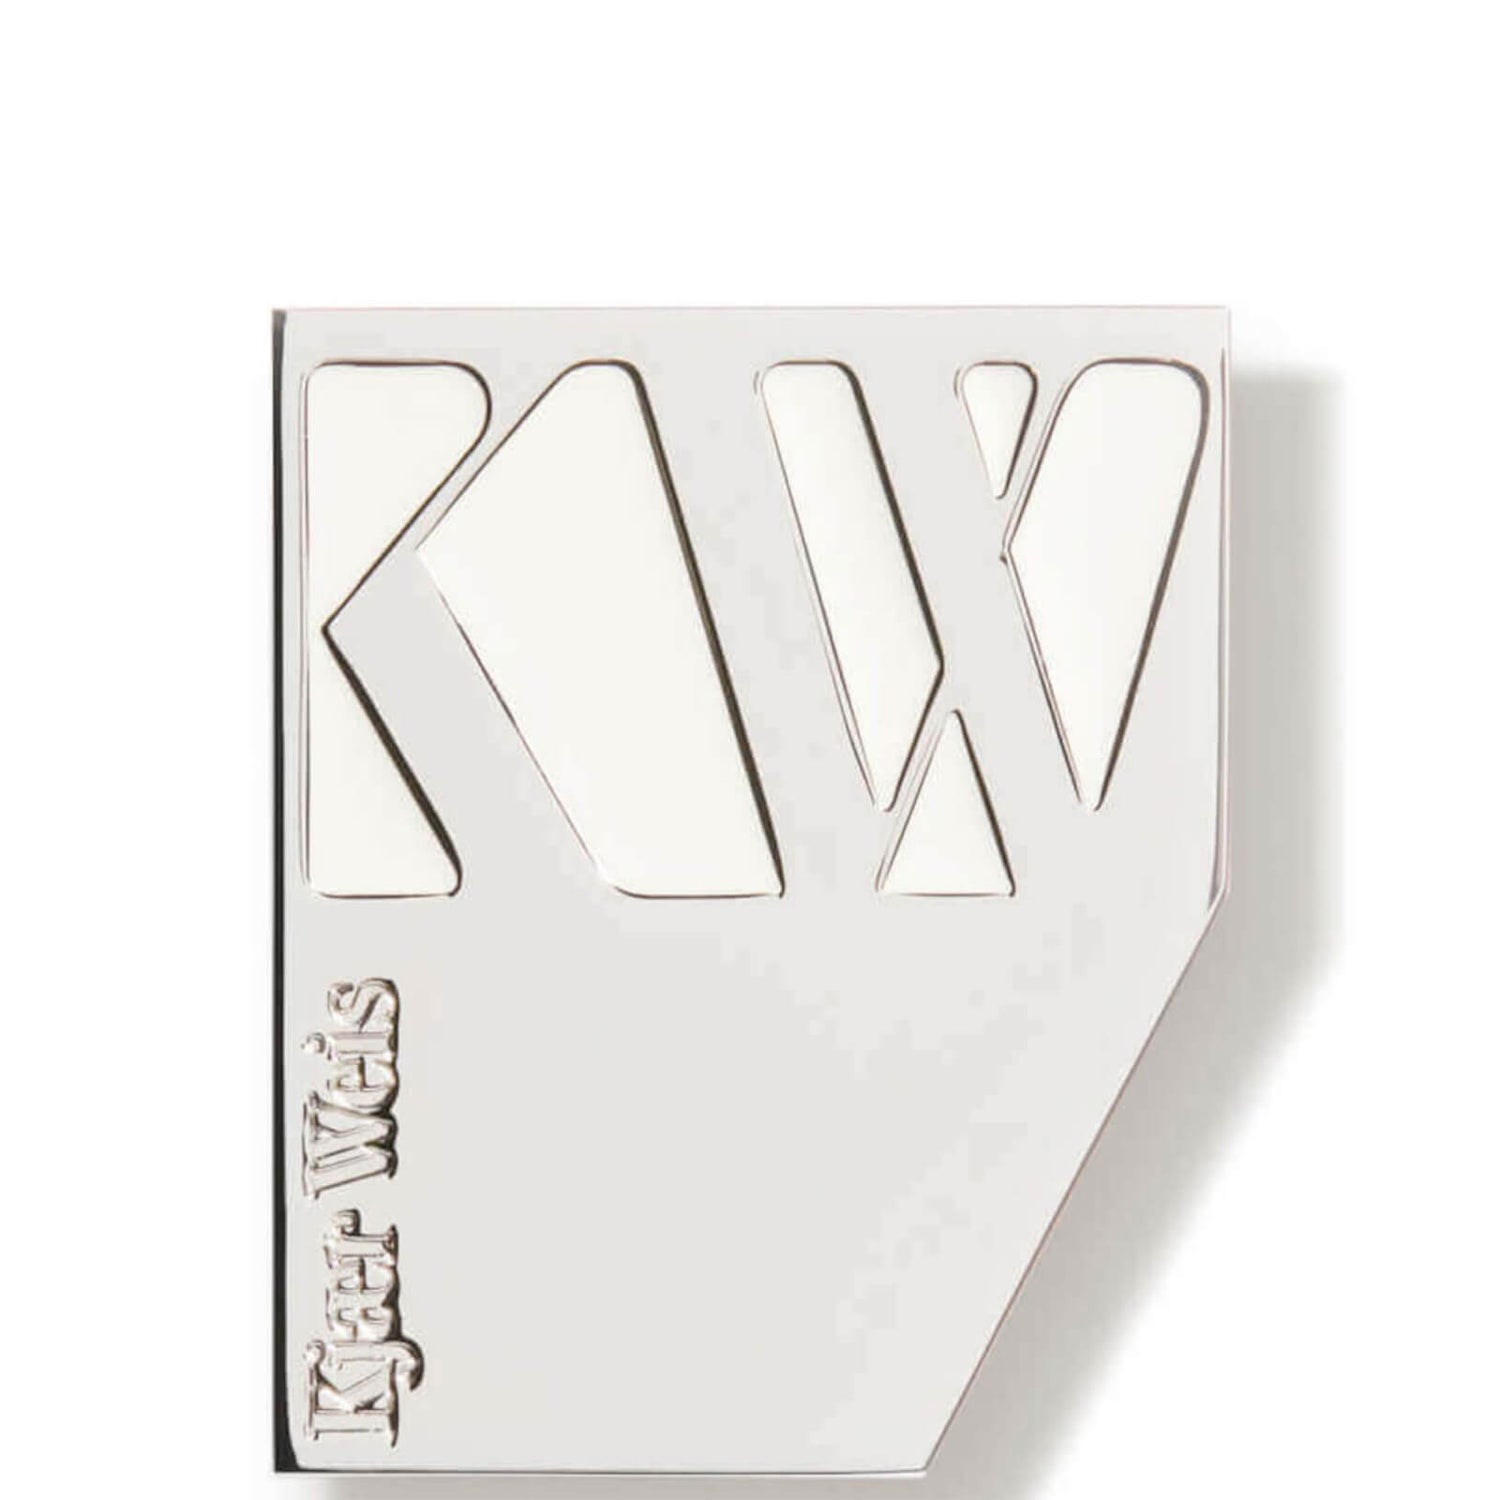 Kjaer Weis Iconic Edition Compact - Cheek (1 piece)